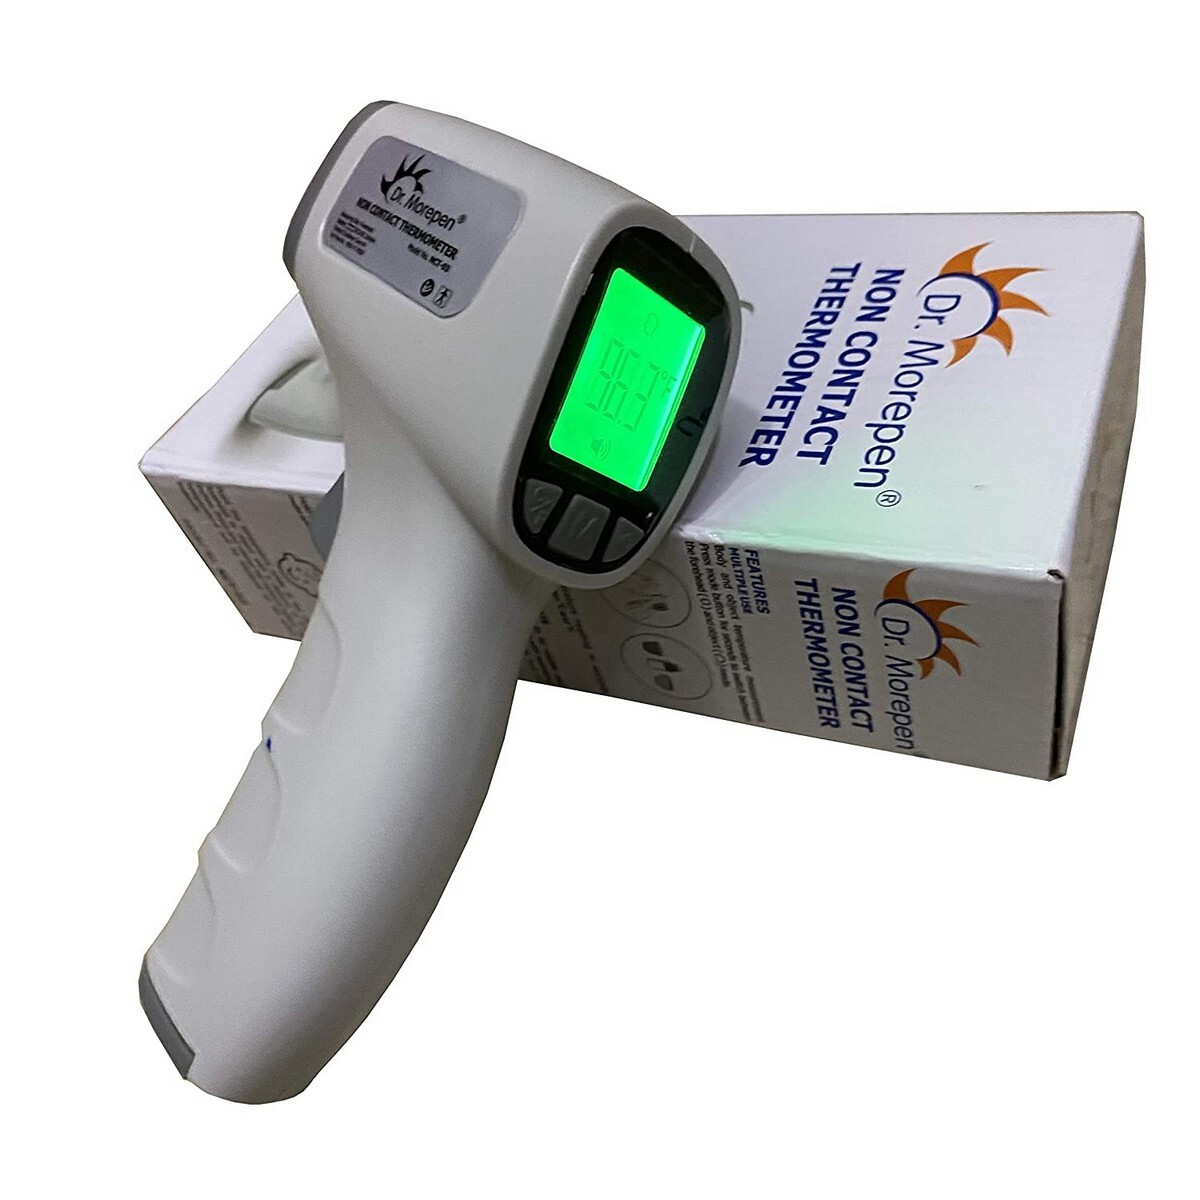 Dr. Morepen Non-Contact Thermometer